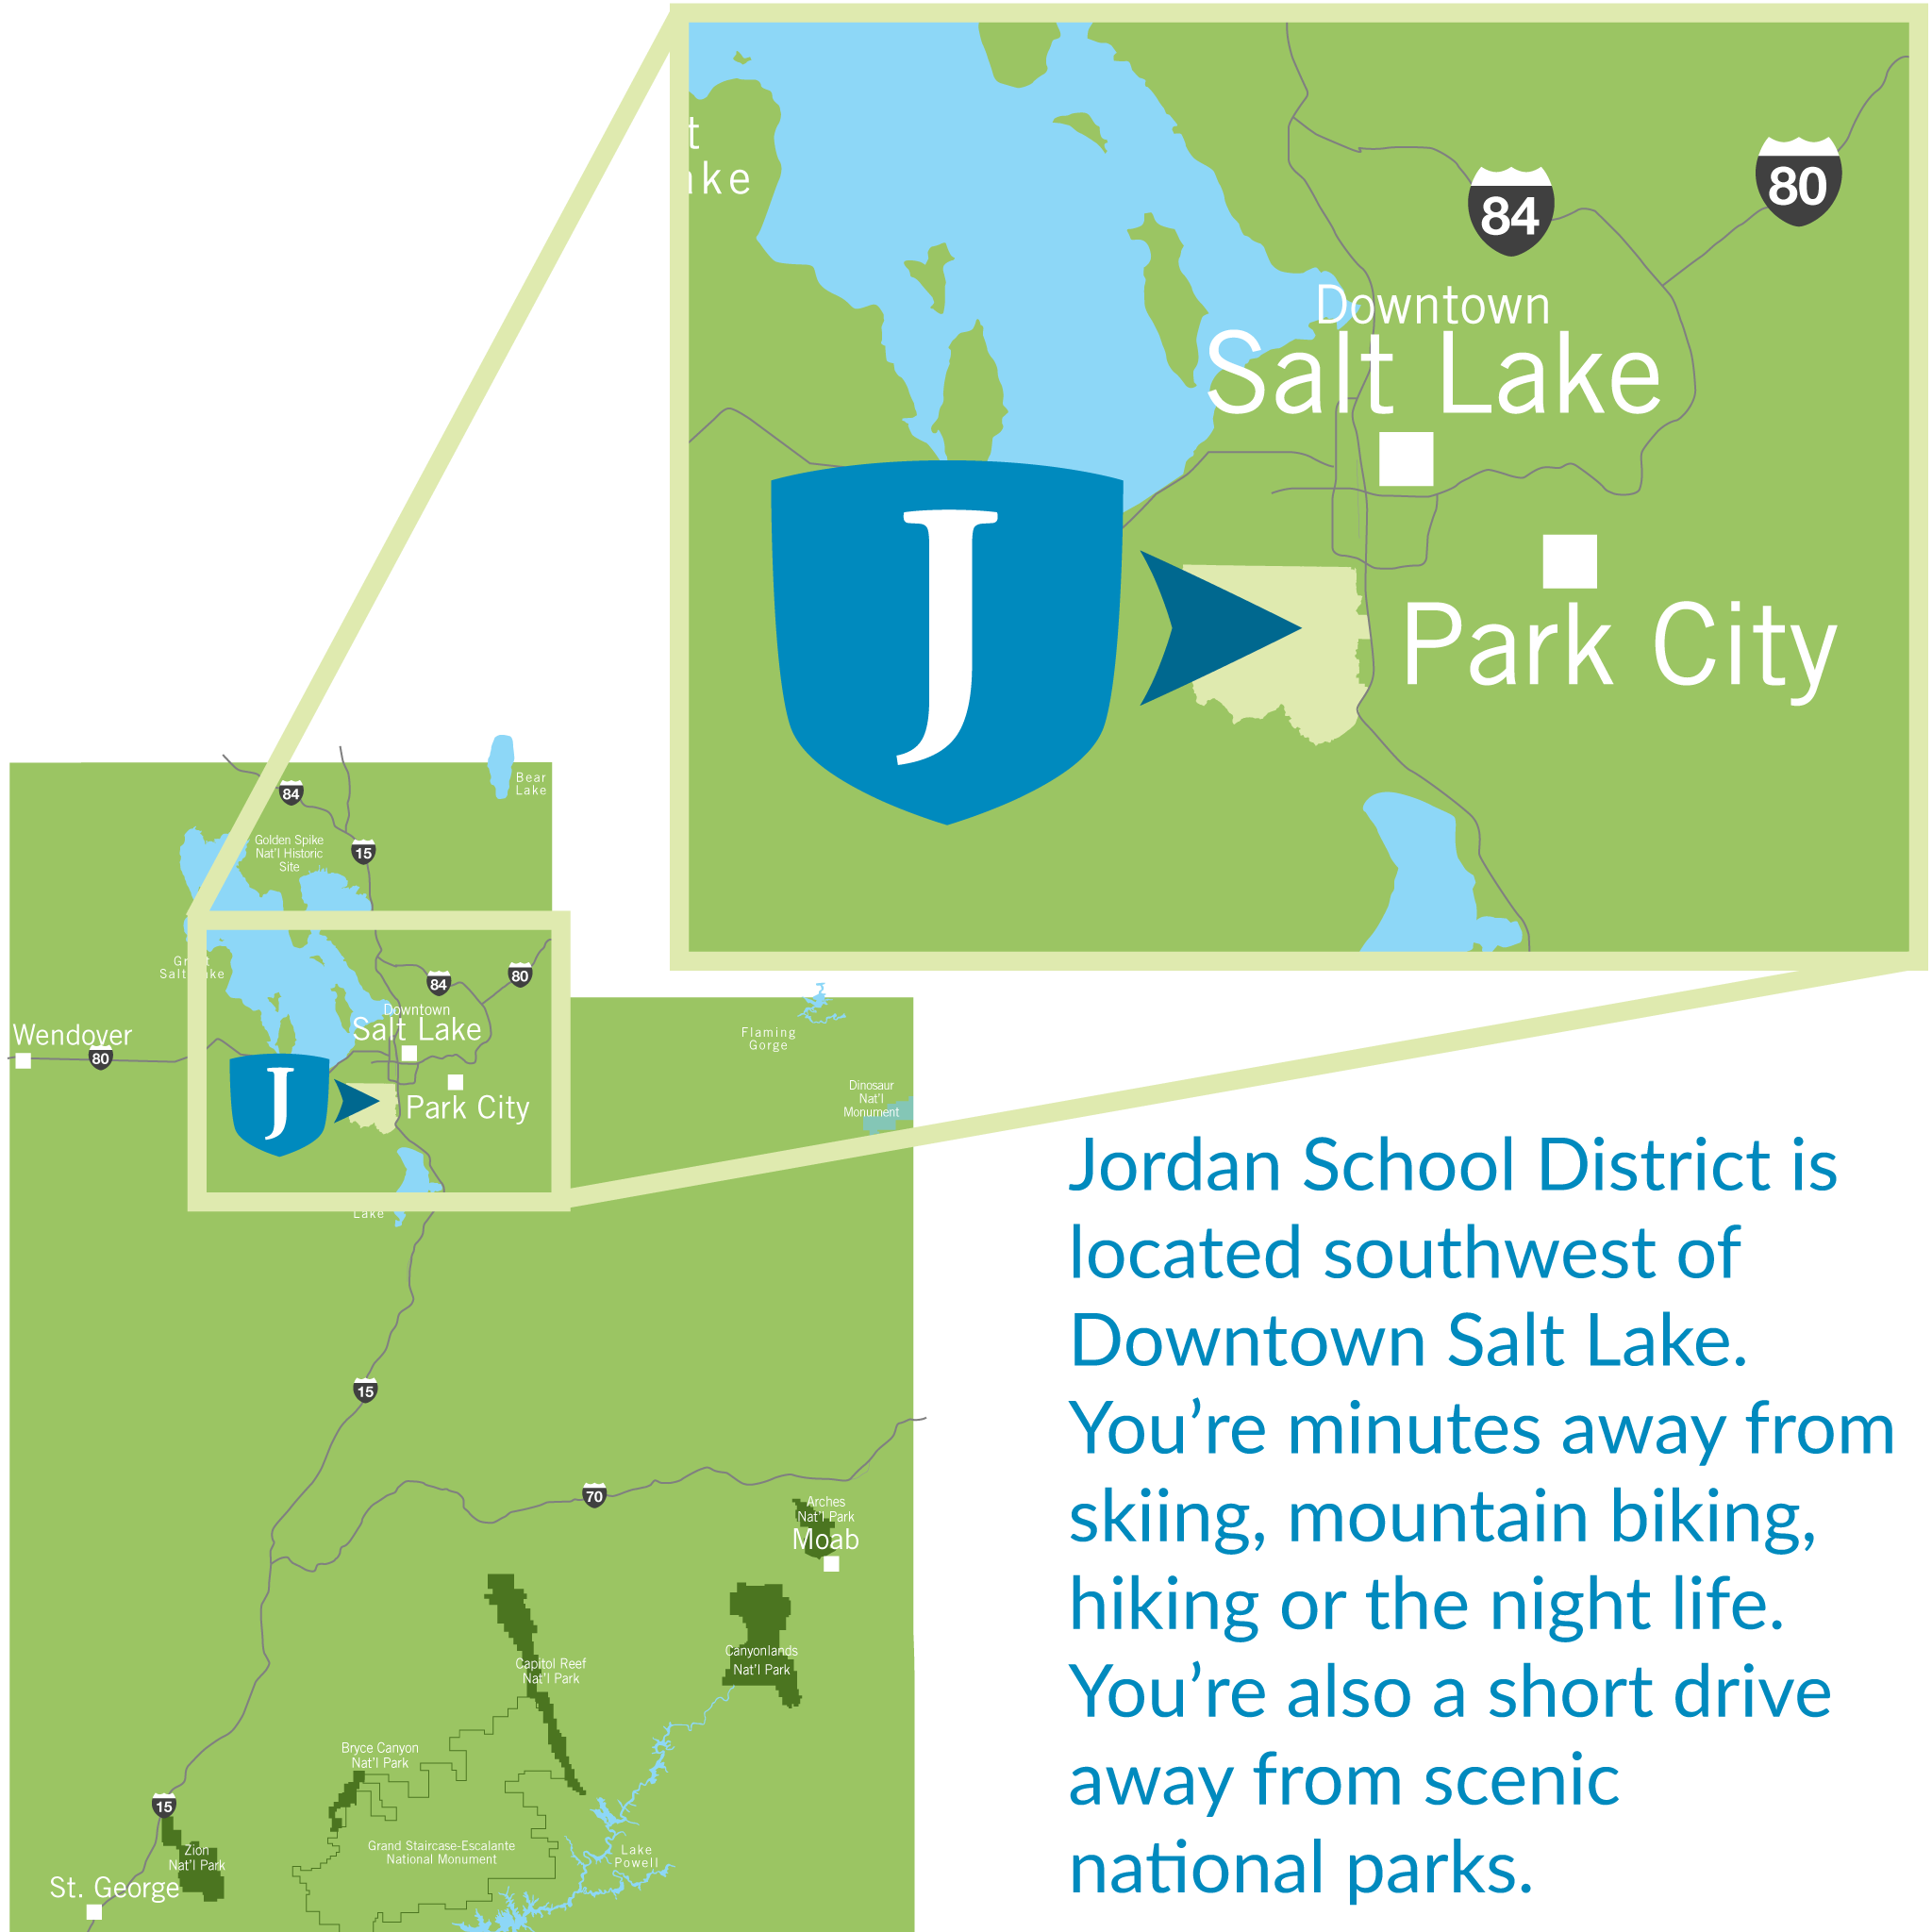 Map - Jordan School District is located southwest of Downtown Salt Lake. You’re minutes away from skiing, mountain biking, hiking or the night life. You’re also a short drive away from scenic national parks.